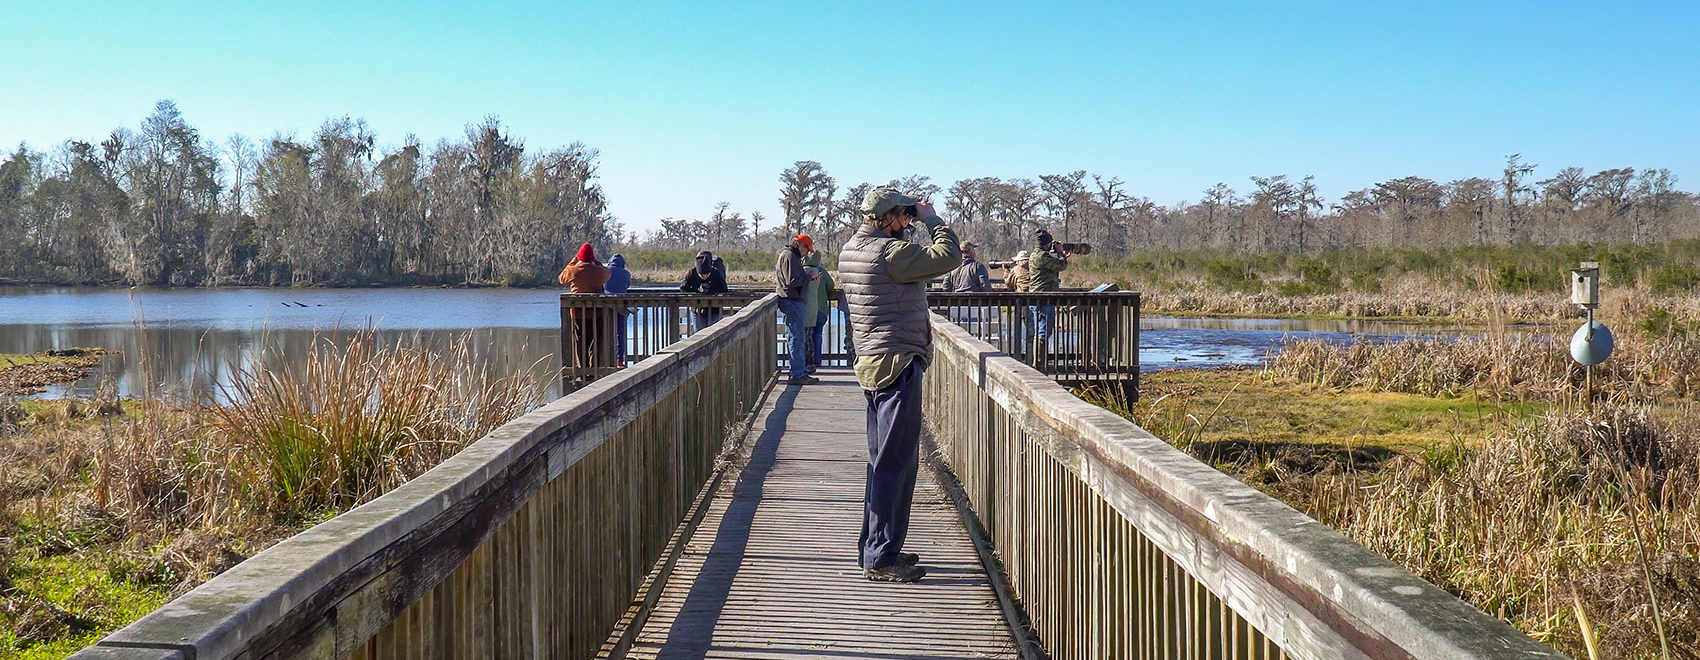 ;eople on boardwalk observation deck over Louisiana marsh for watching and photographing birds